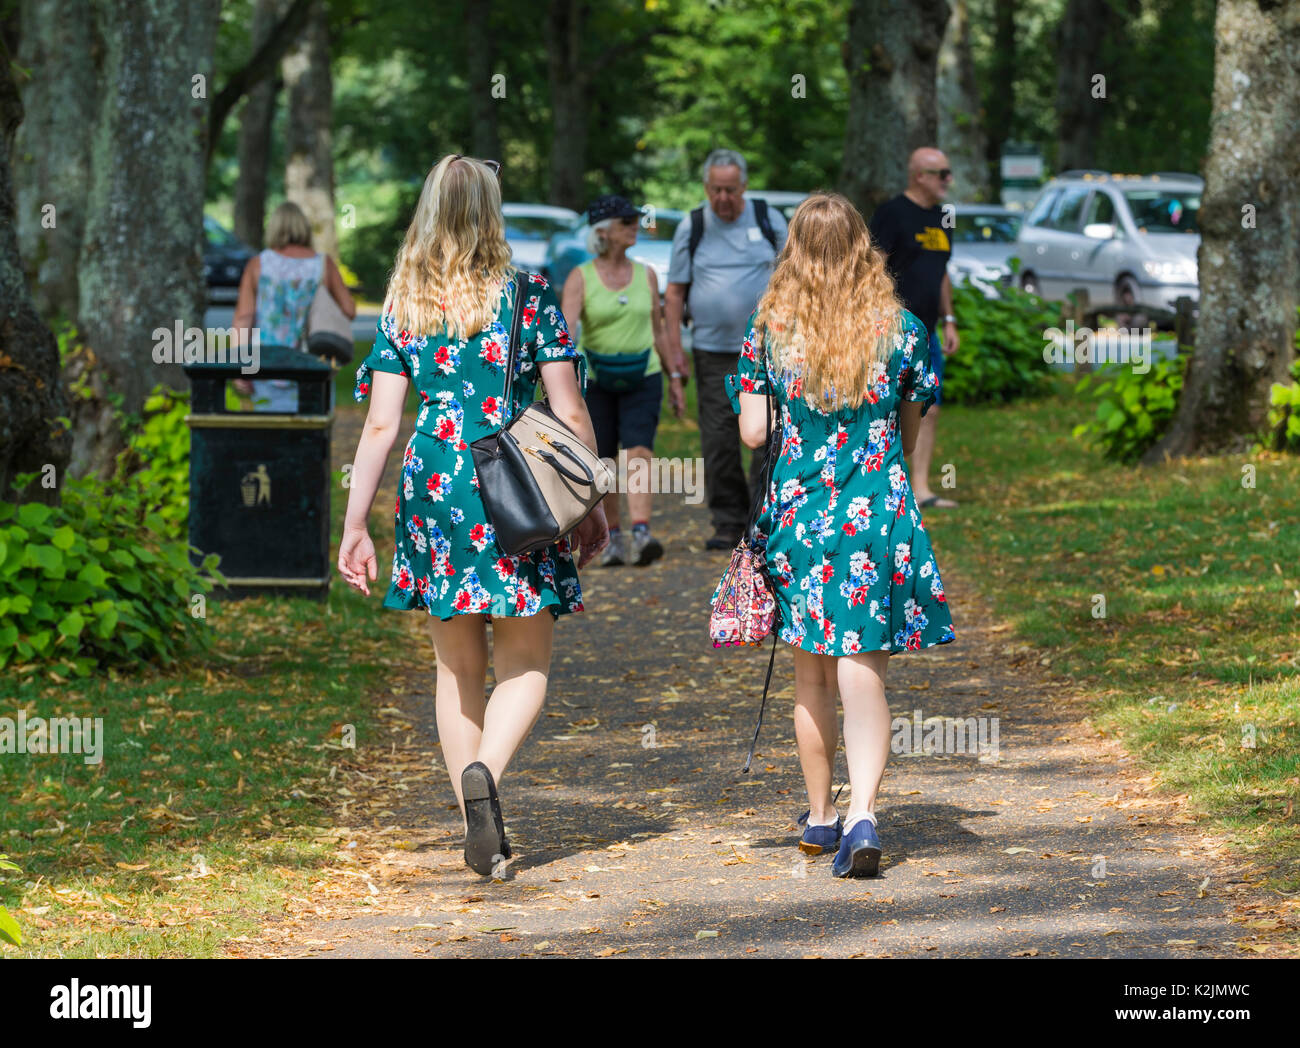 Pair of young women dressed in identical Summer dresses walking in Summer. 2 of a kind concept. Twins. Note: The women may or may not be related. Stock Photo